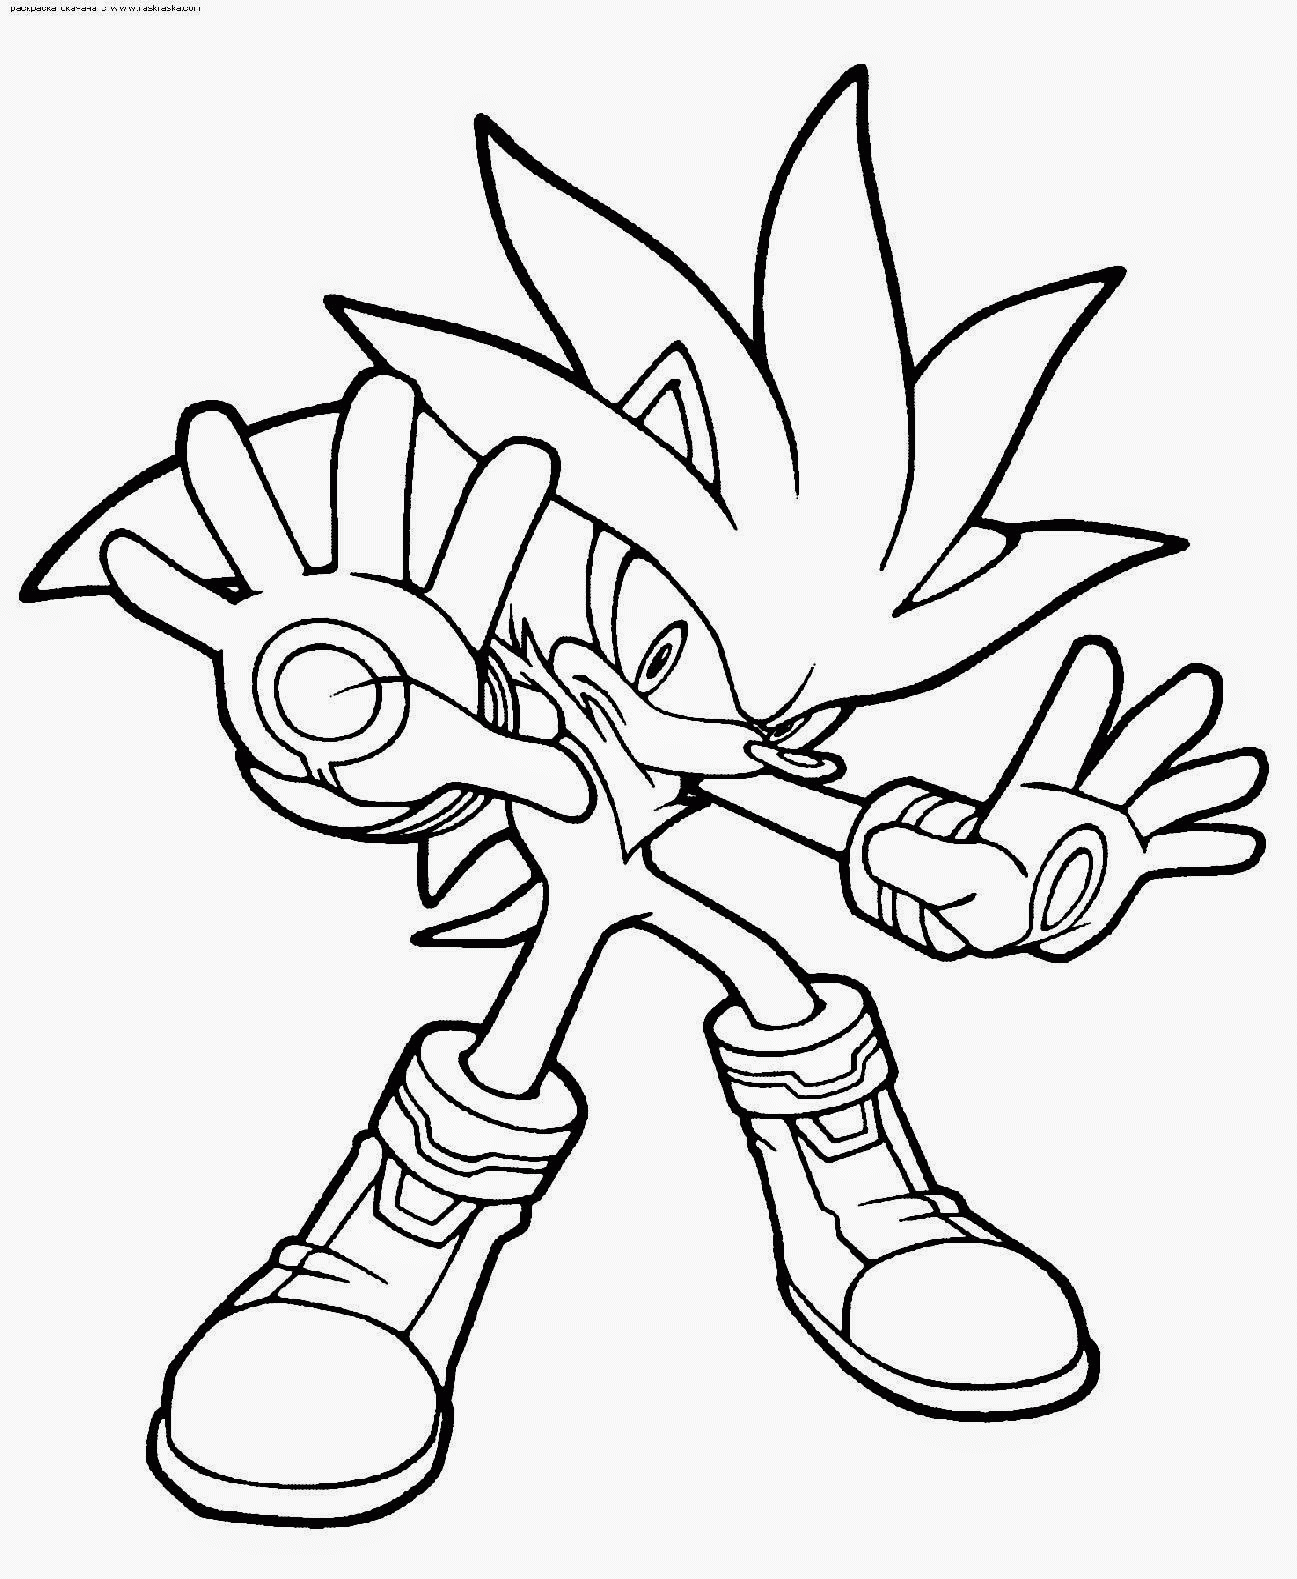 Coloring Pages Of Sonic Characters To Print - High Quality ...